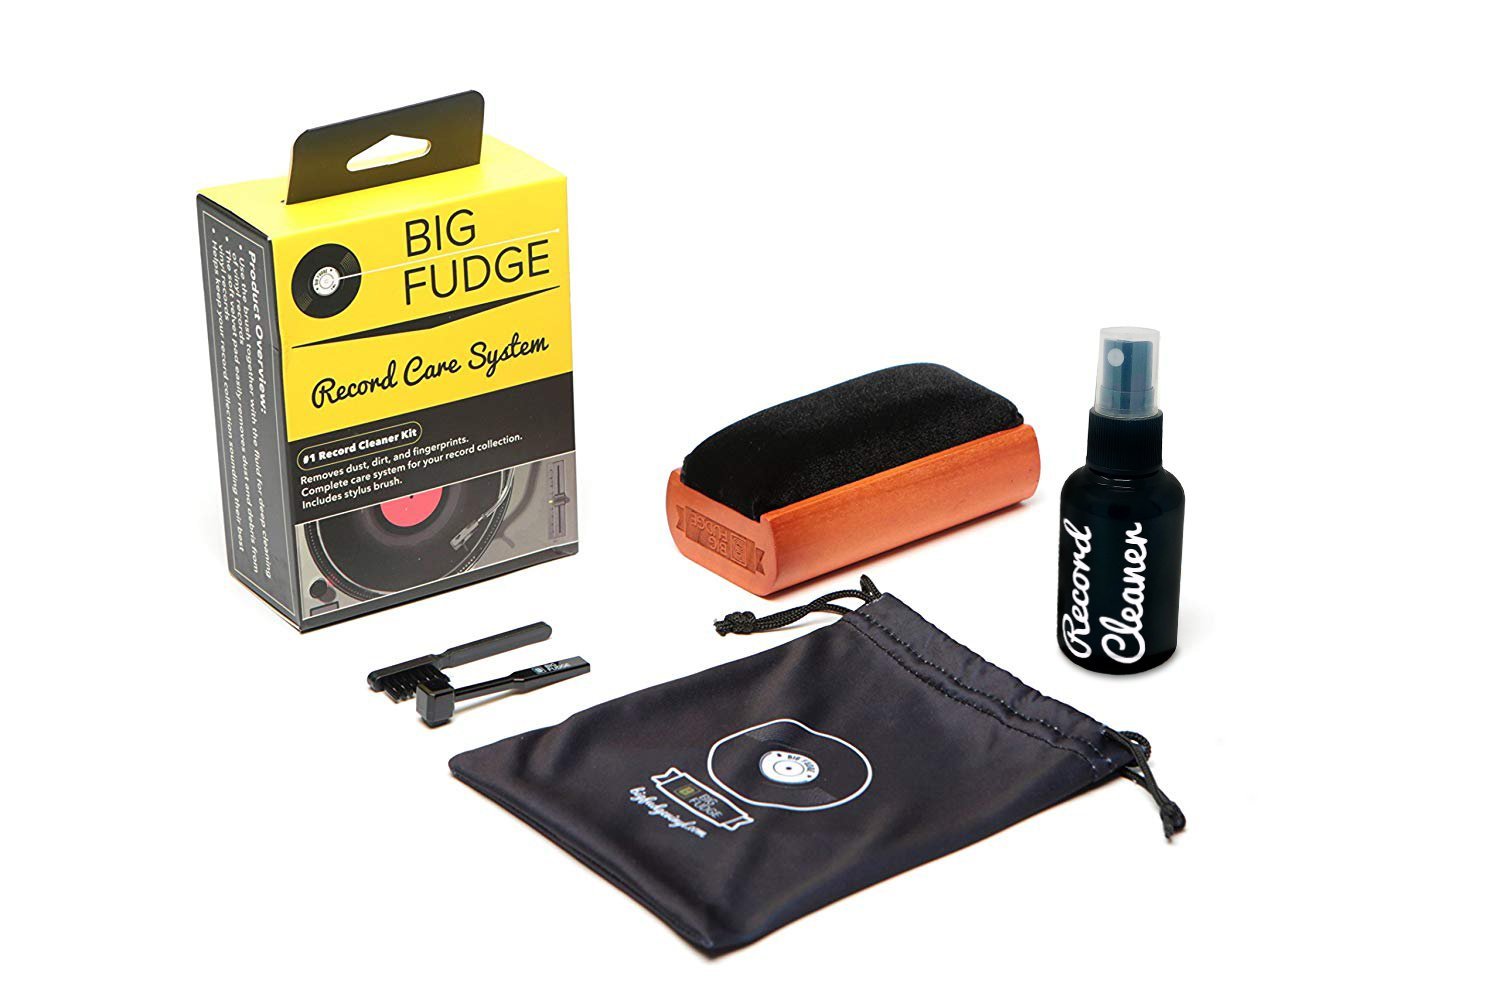 Image of Big Fudge’s vinyl record cleaning kit for how to clean a record effectively